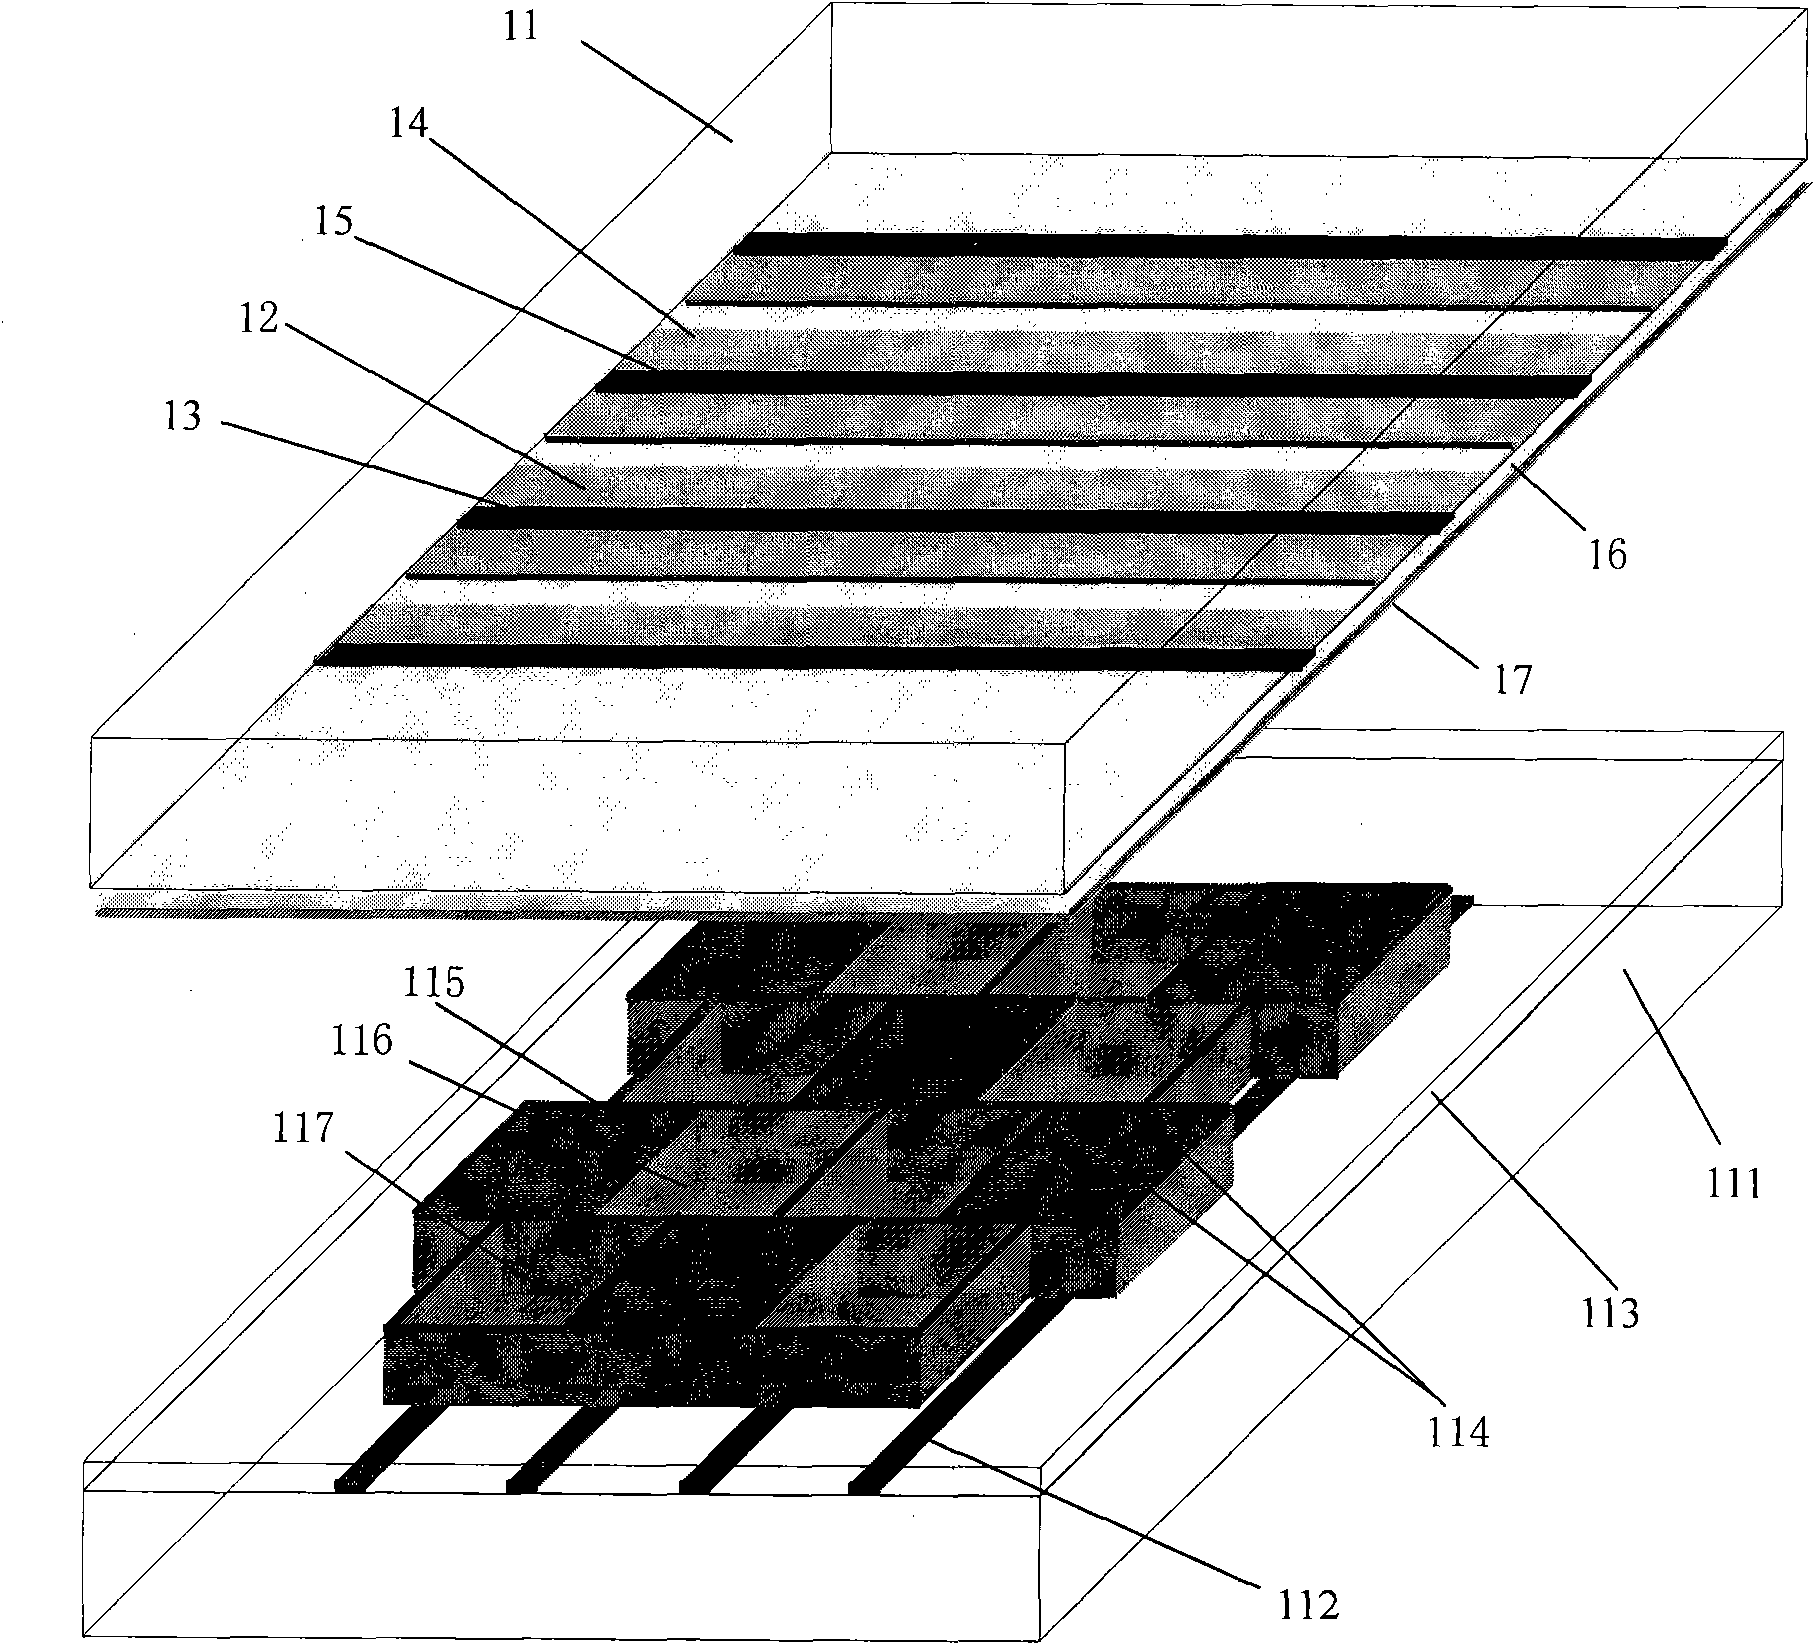 Plasma display panel provided with triangular pixel structure and driven according to sub-row branch fields